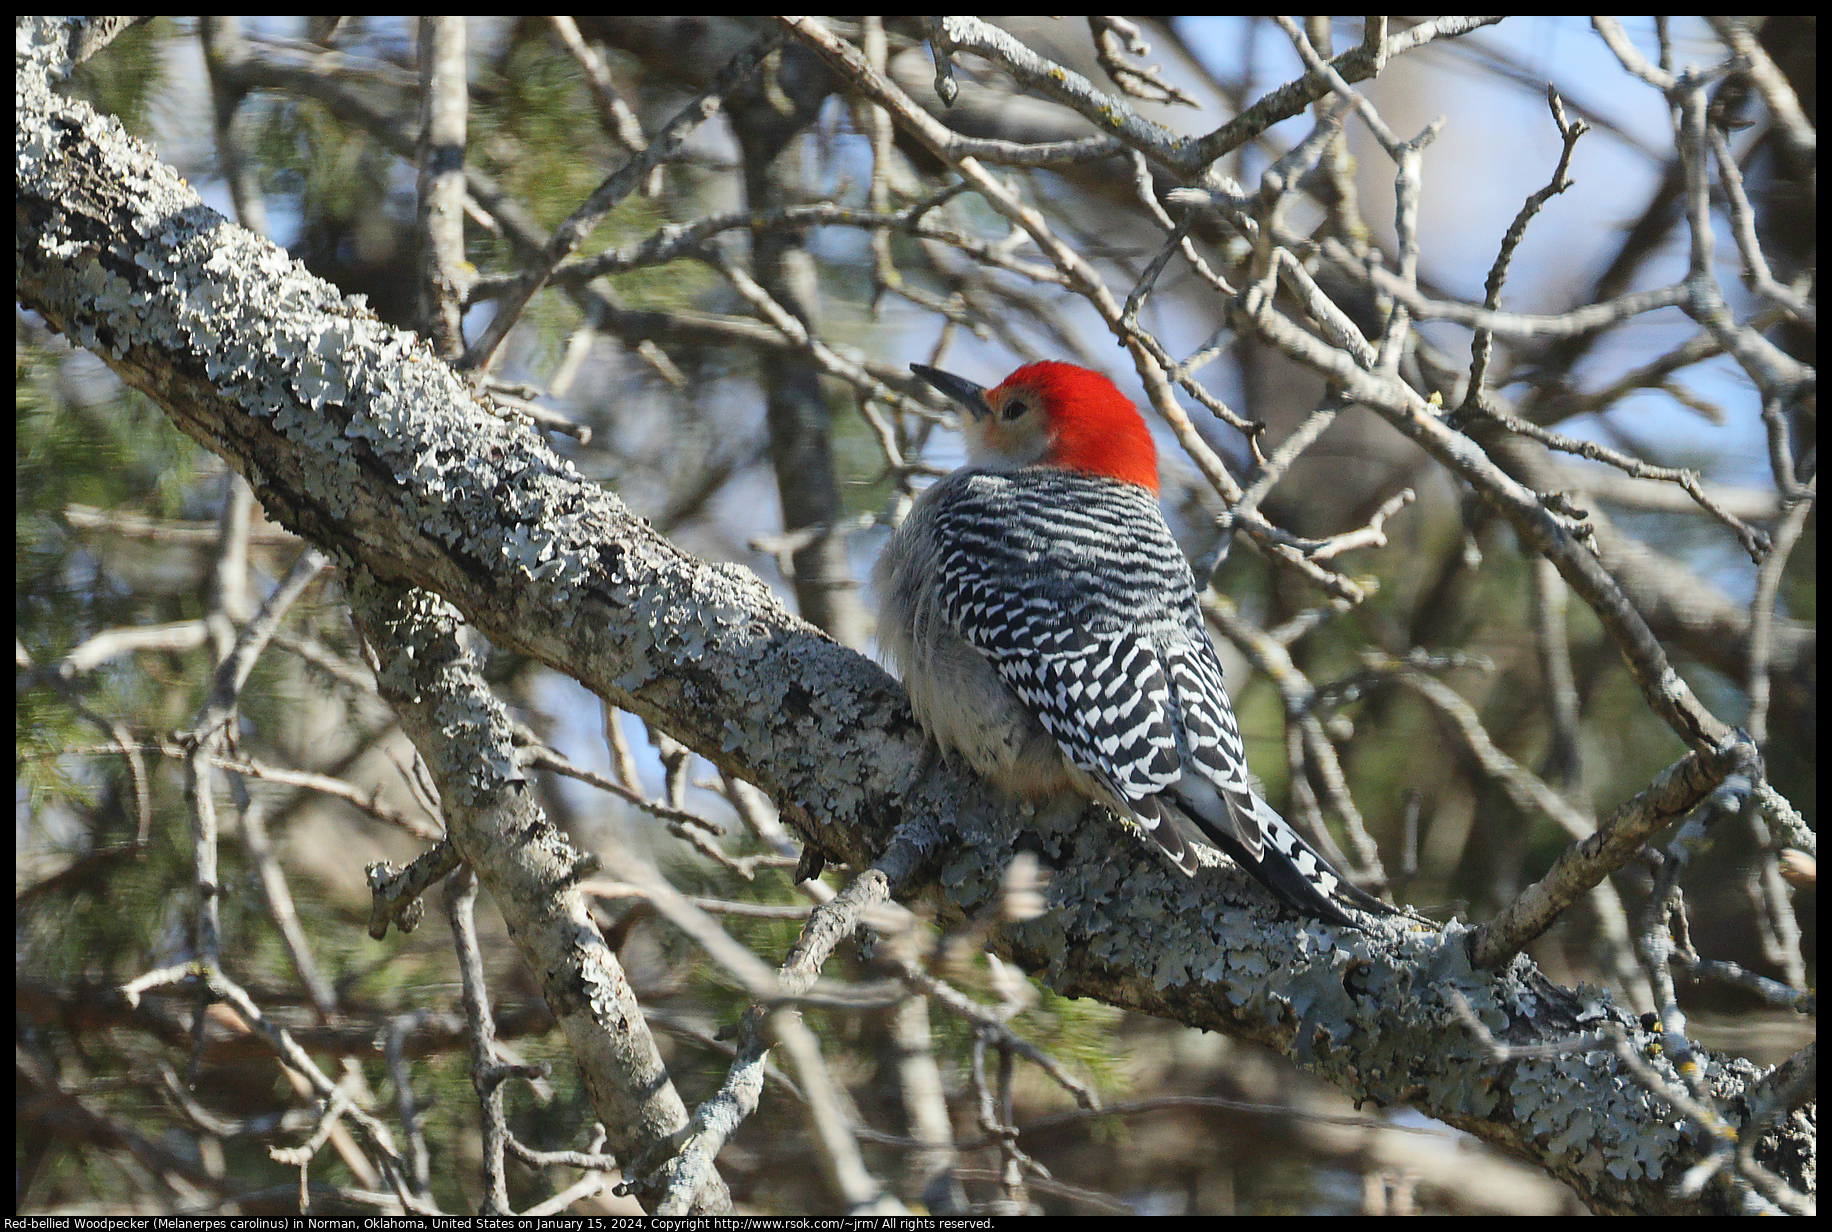 Red-bellied Woodpecker (Melanerpes carolinus) in Norman, Oklahoma, United States on January 15, 2024